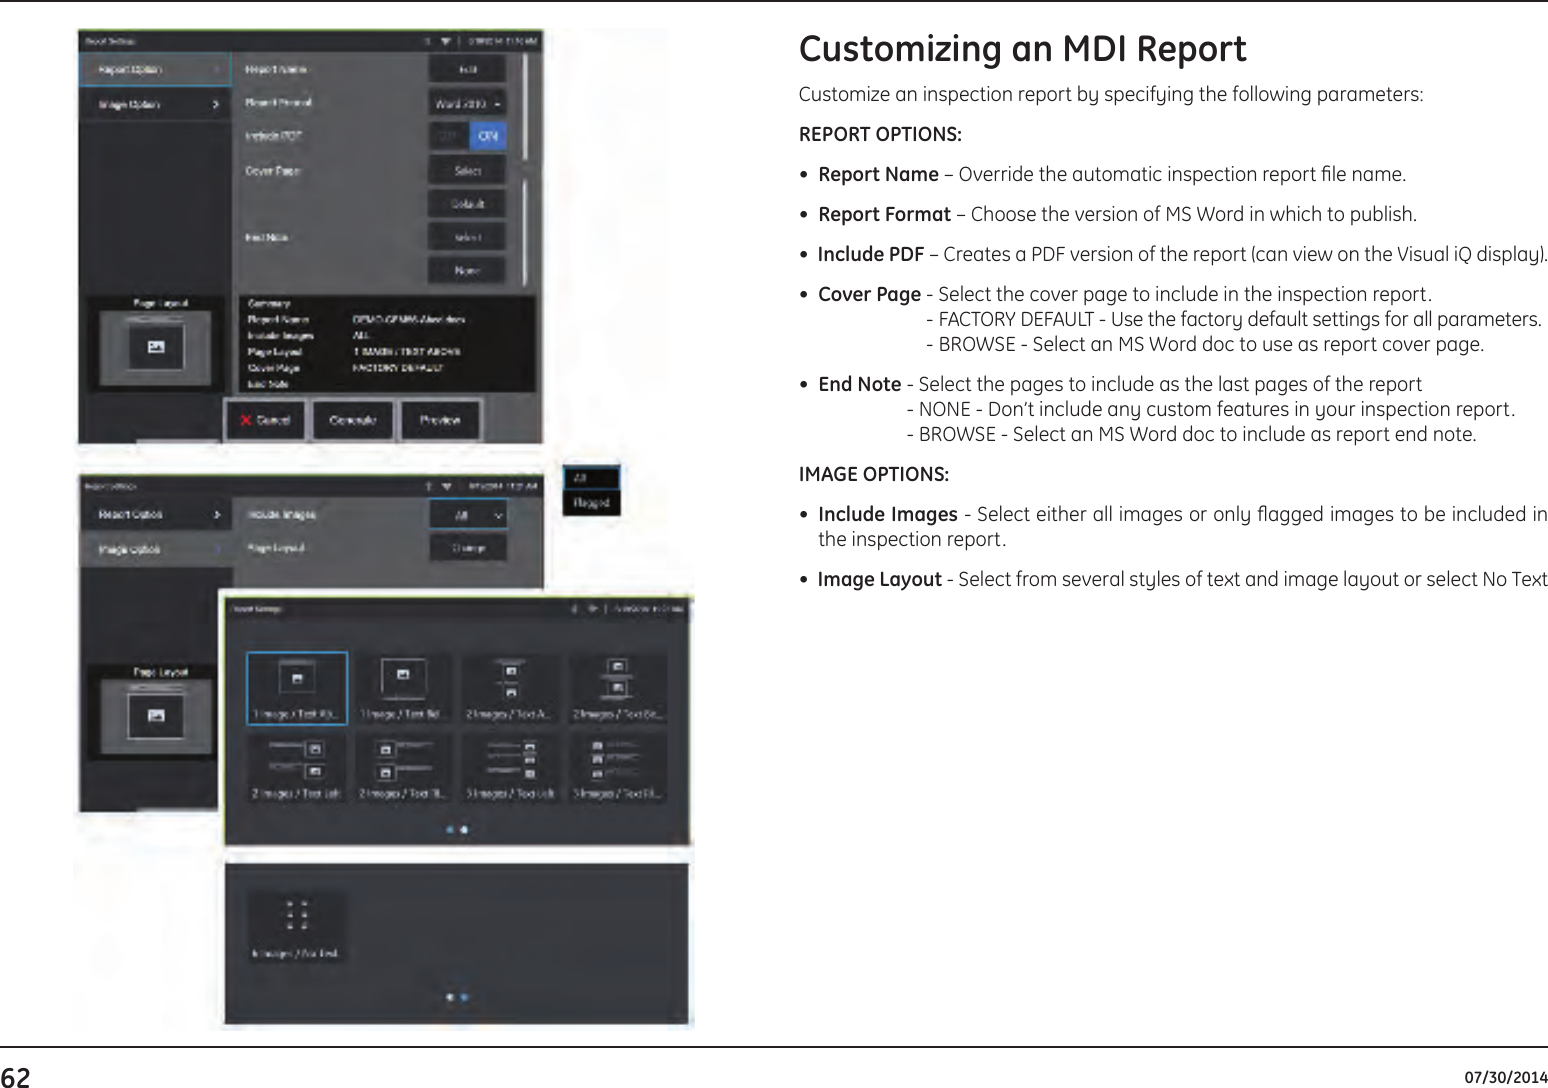 62 07/30/2014Customizing an MDI ReportCustomize an inspection report by specifying the following parameters:REPORT OPTIONS:•  Report Name – Override the automatic inspection report le name.•  Report Format – Choose the version of MS Word in which to publish.•  Include PDF – Creates a PDF version of the report (can view on the Visual iQ display).•  Cover Page  - Select the cover page to include in the inspection report. - FACTORY DEFAULT - Use the factory default settings for all parameters. - BROWSE - Select an MS Word doc to use as report cover page.•  End Note  - Select the pages to include as the last pages of the report - NONE - Don’t include any custom features in your inspection report. - BROWSE - Select an MS Word doc to include as report end note.IMAGE OPTIONS:•    Include  Images - Select either all images or only agged images to be included in the inspection report.•  Image Layout - Select from several styles of text and image layout or select No Text